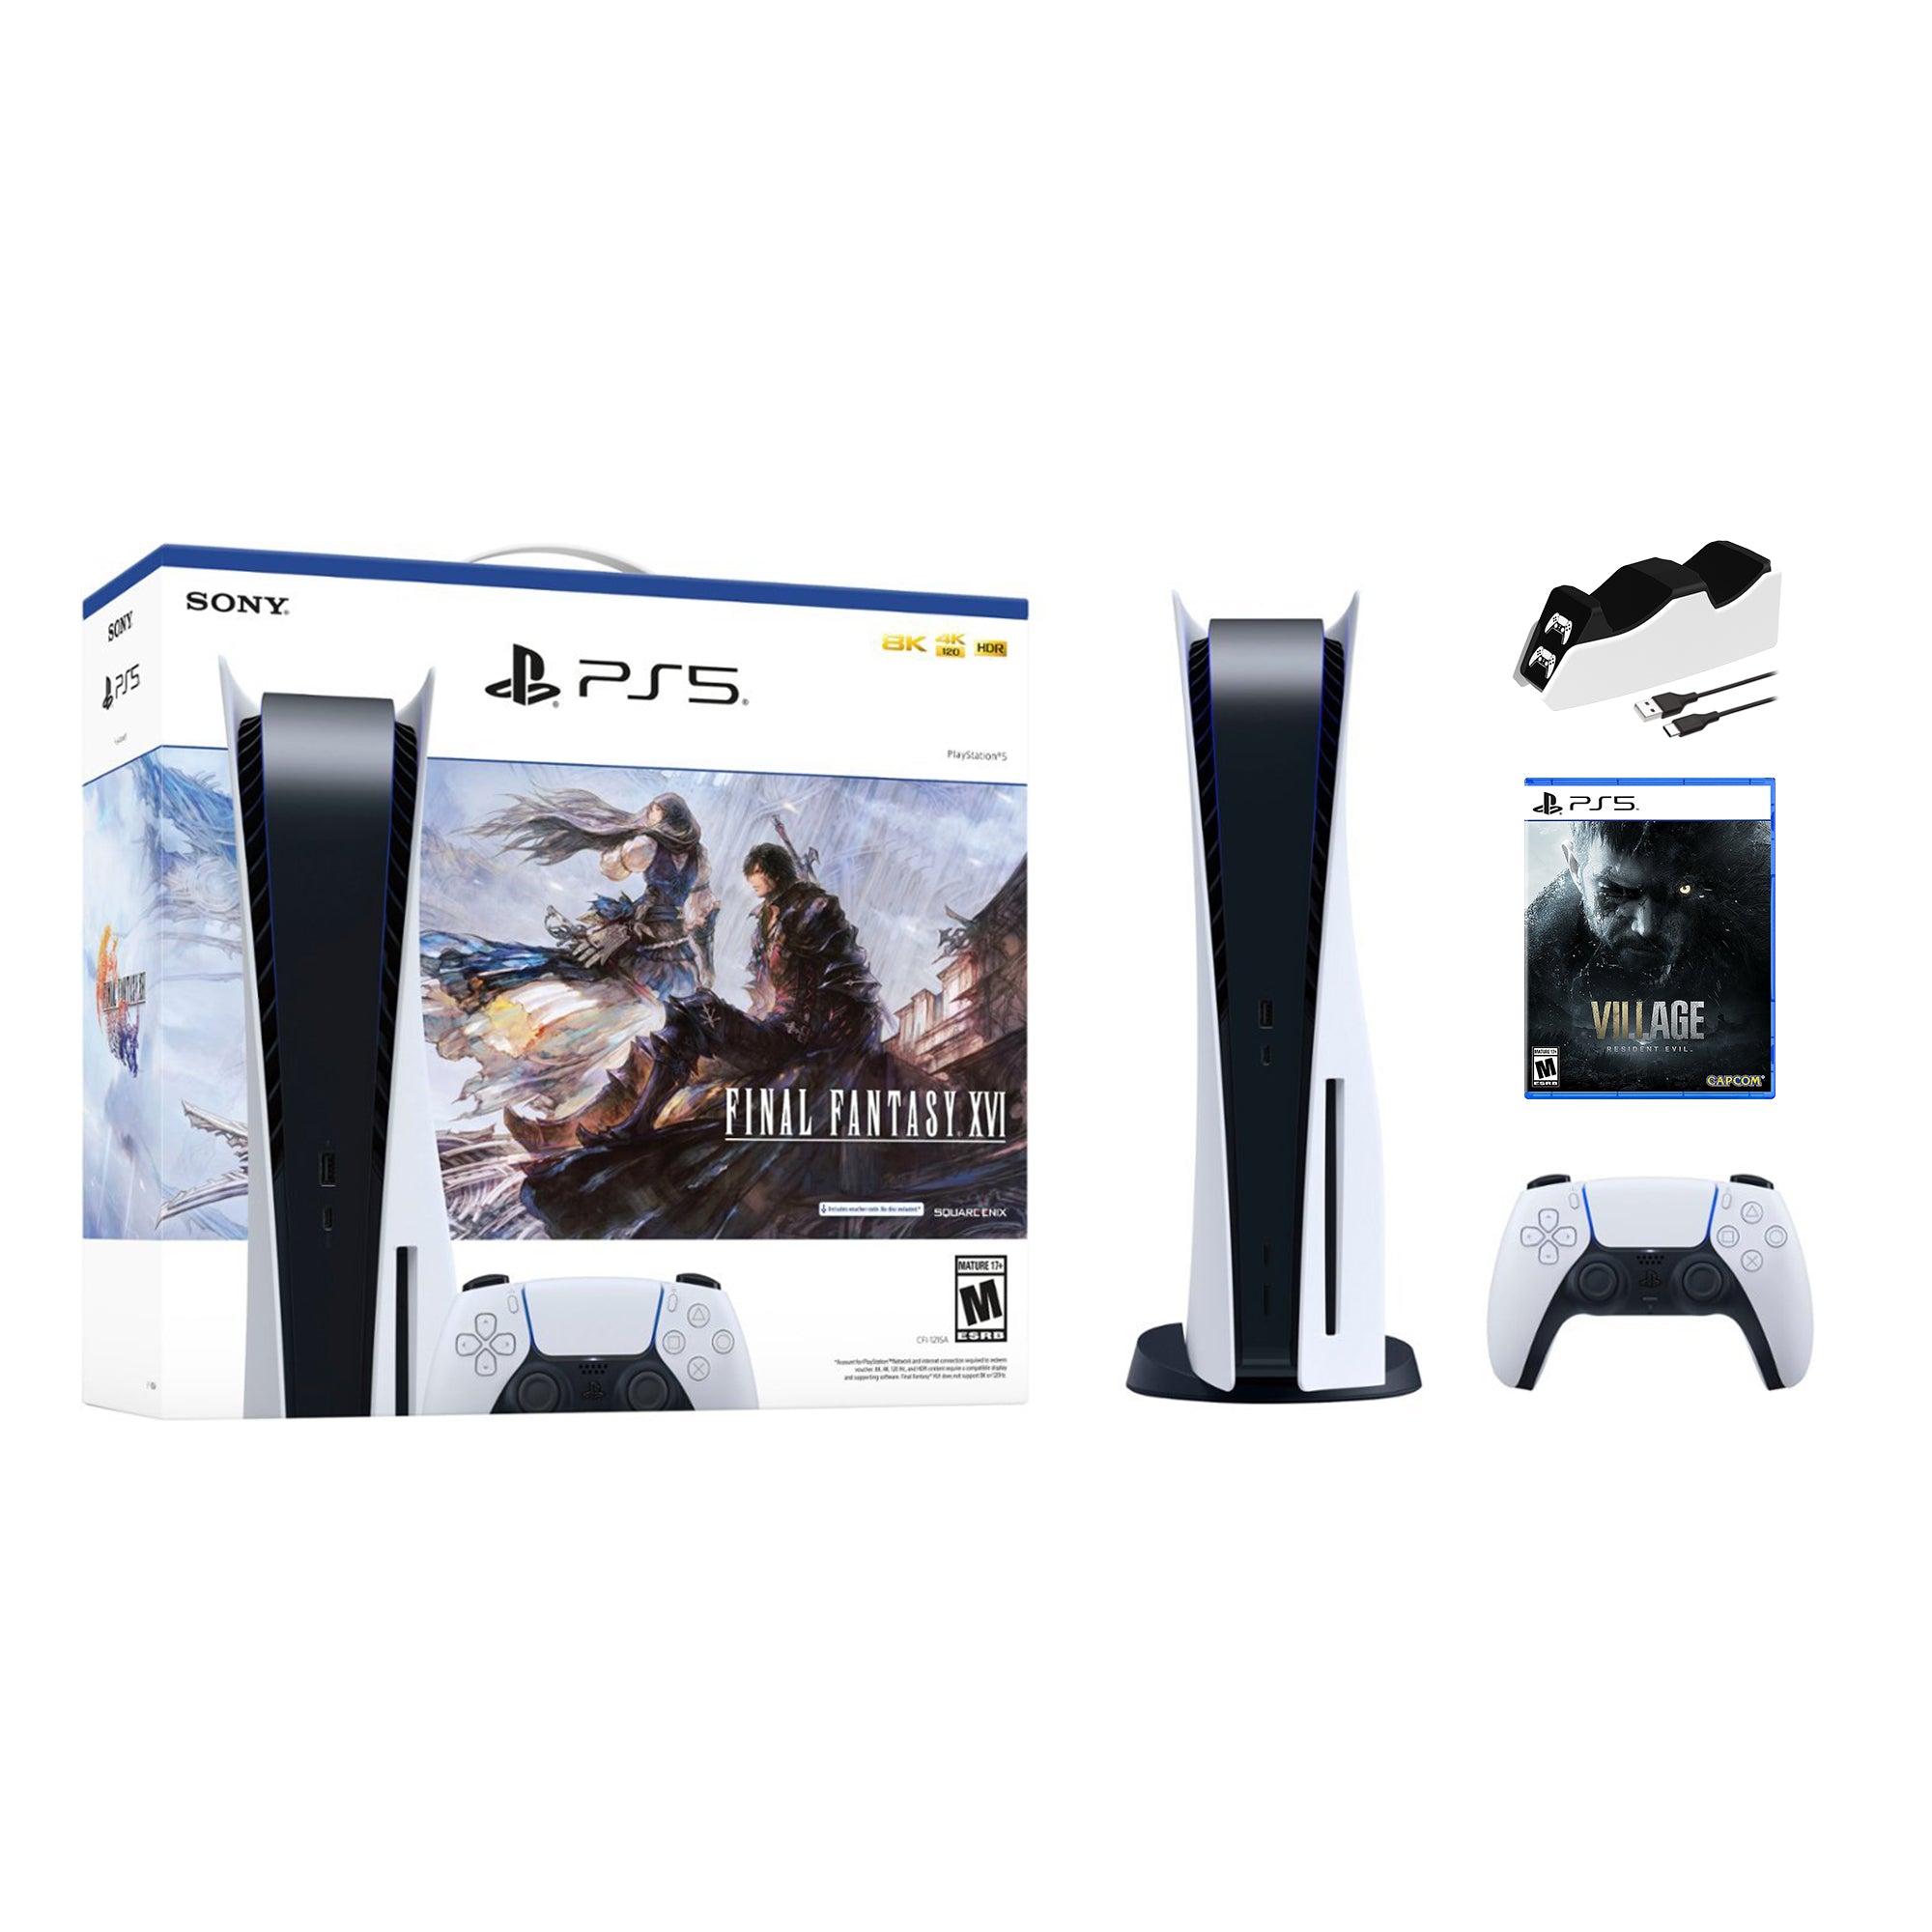 Playstation 5 Disc Edition FINAL FANTASY XVI Bundle with Resident Evil Village and Mytrix Controller Charger - PS5, White